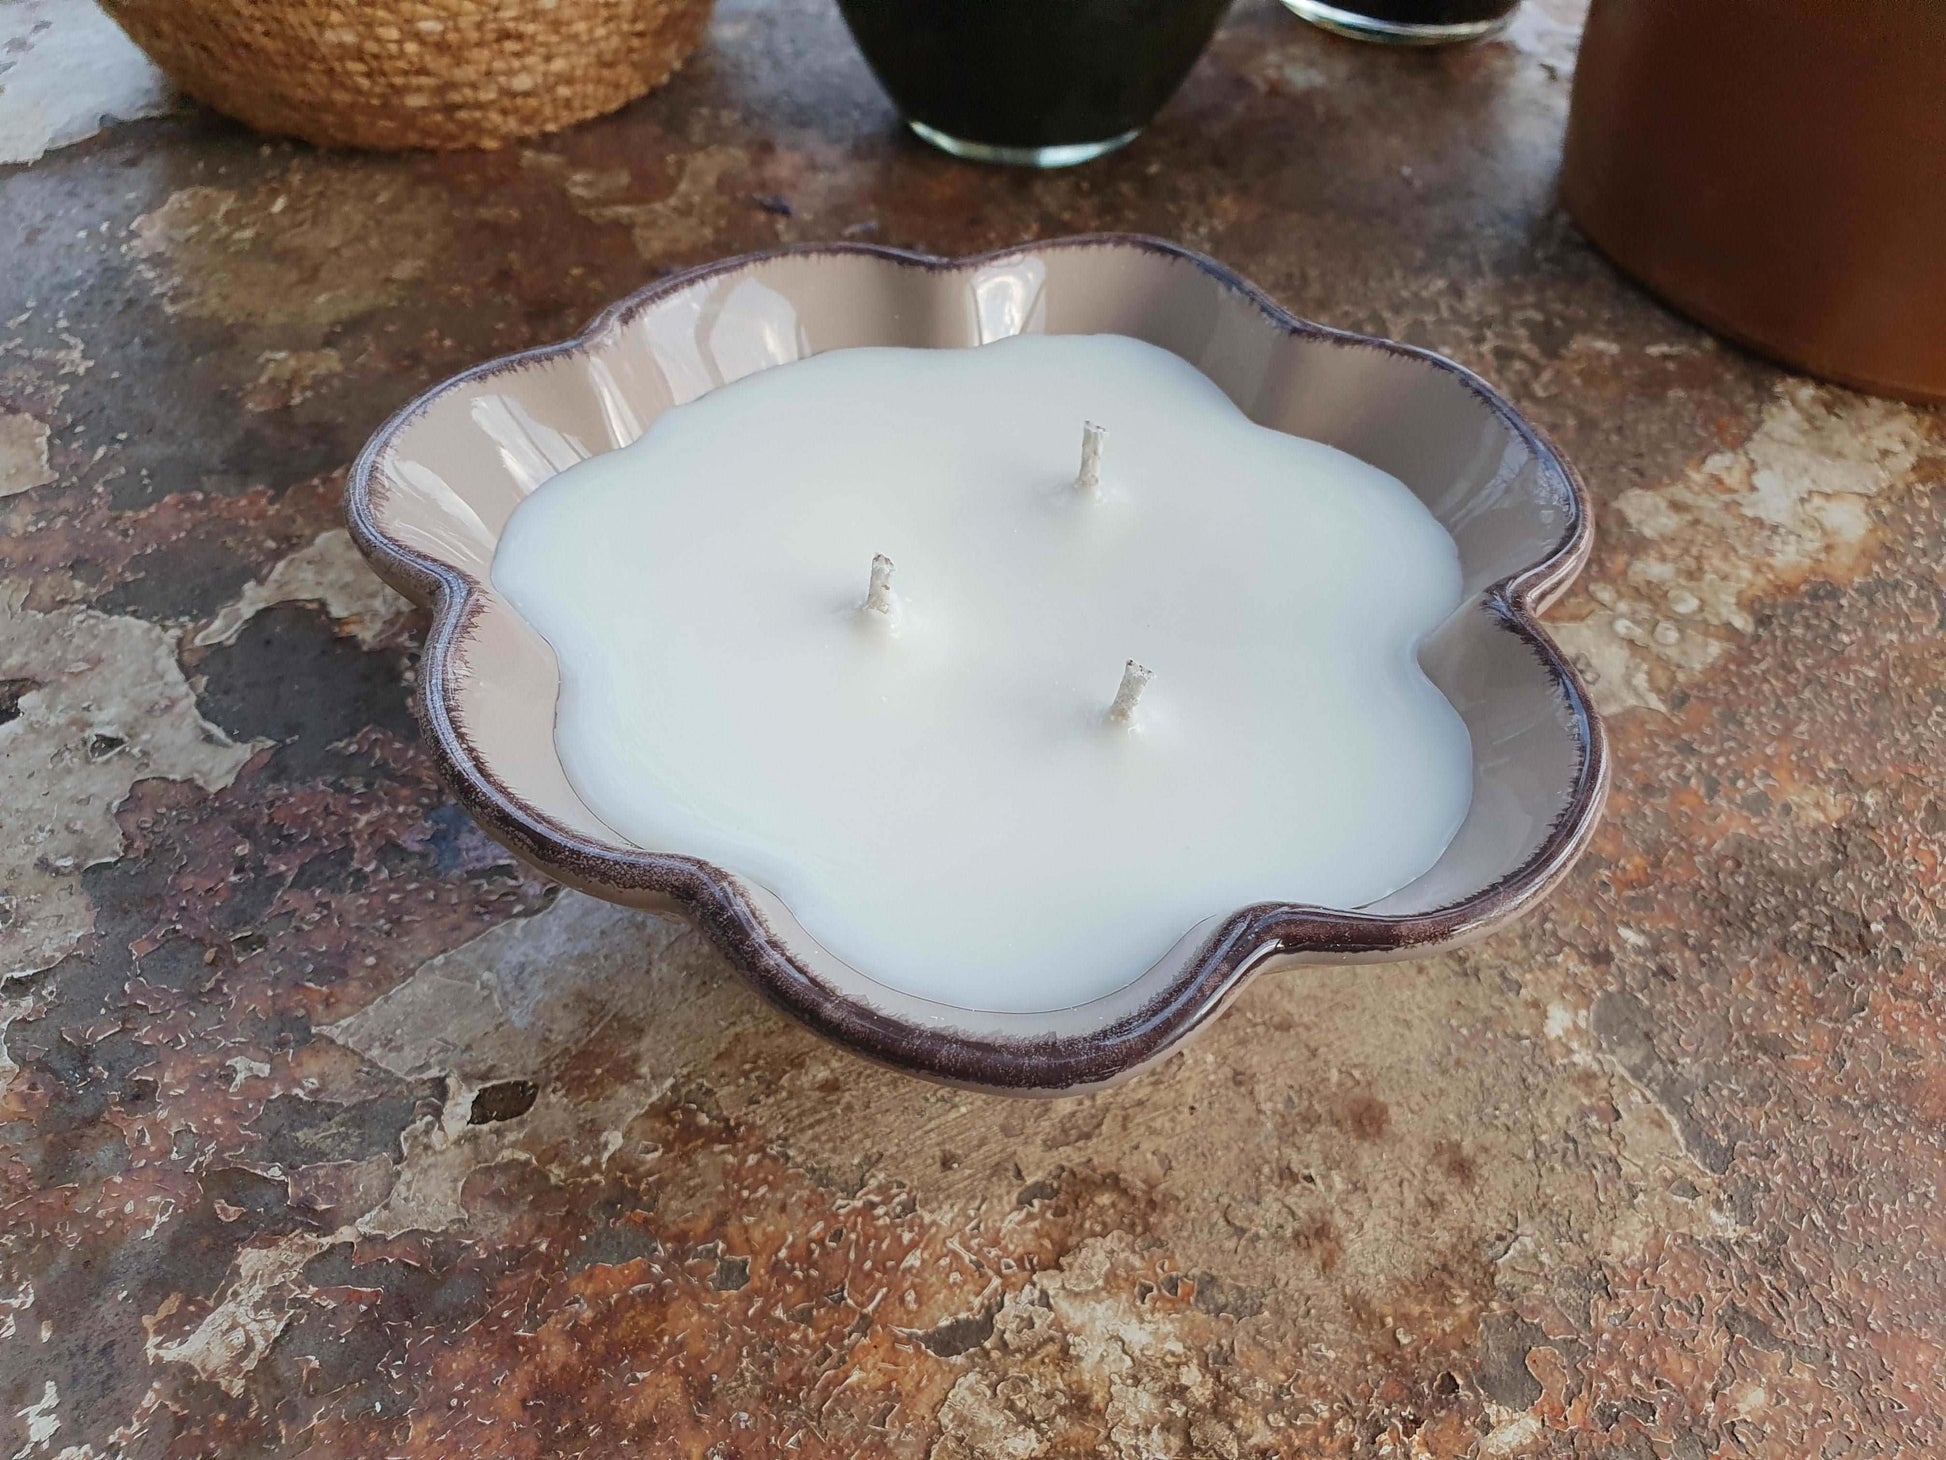 Flower shaped soy candle with Lavender vanilla scent